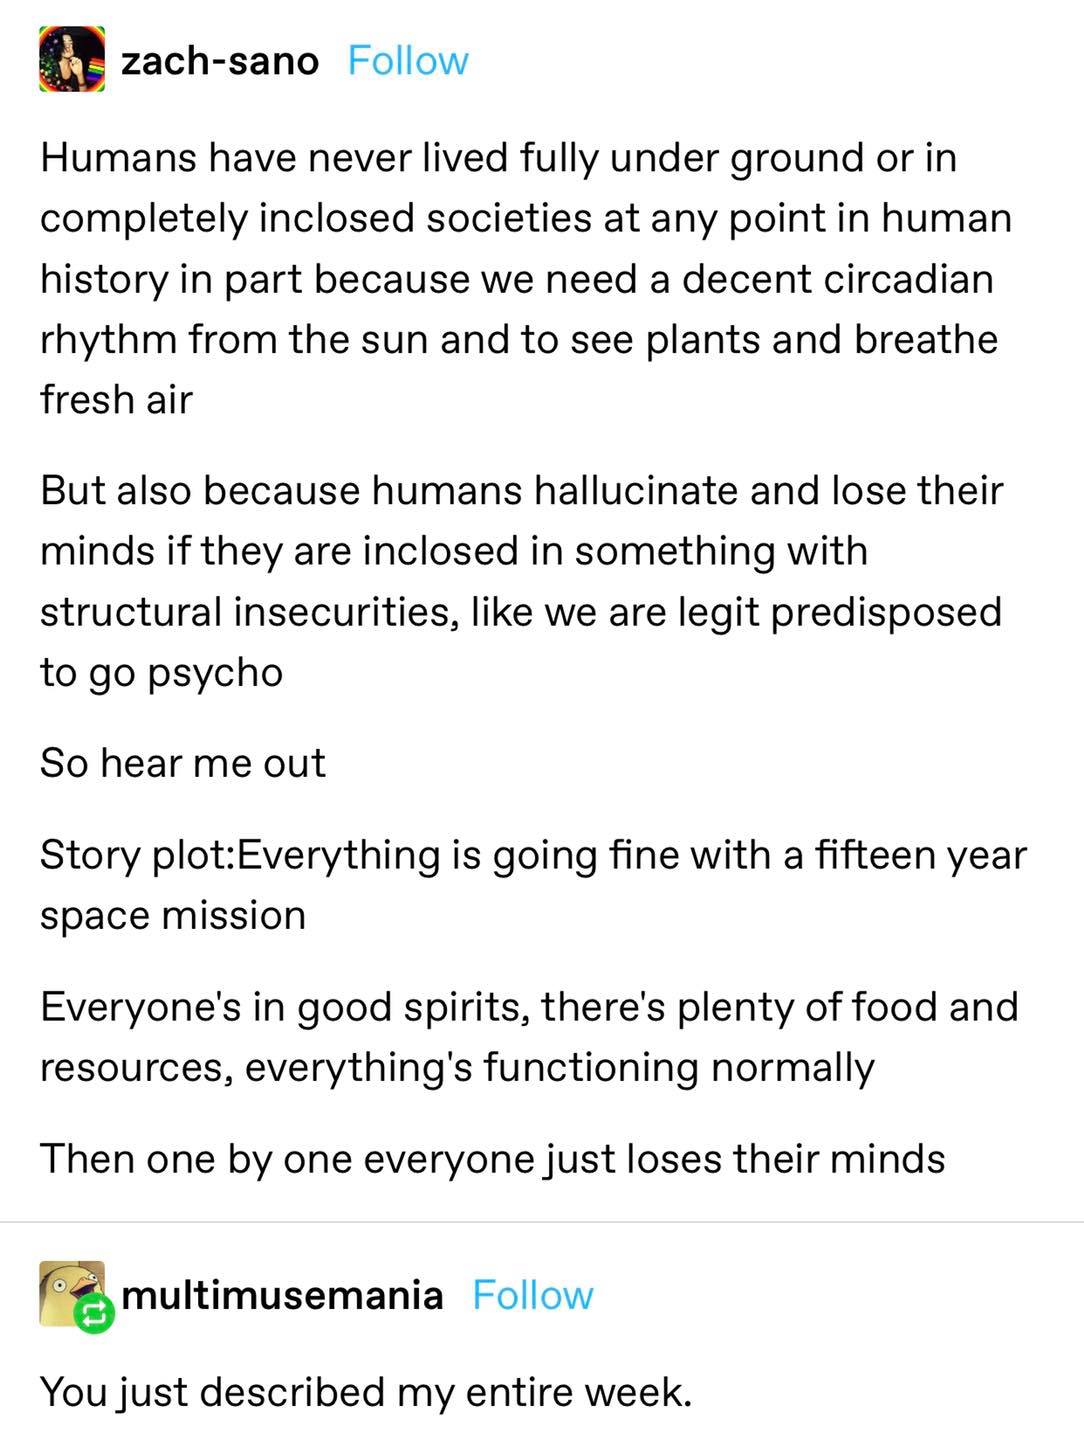 Humans Need Plants to Stay Sane